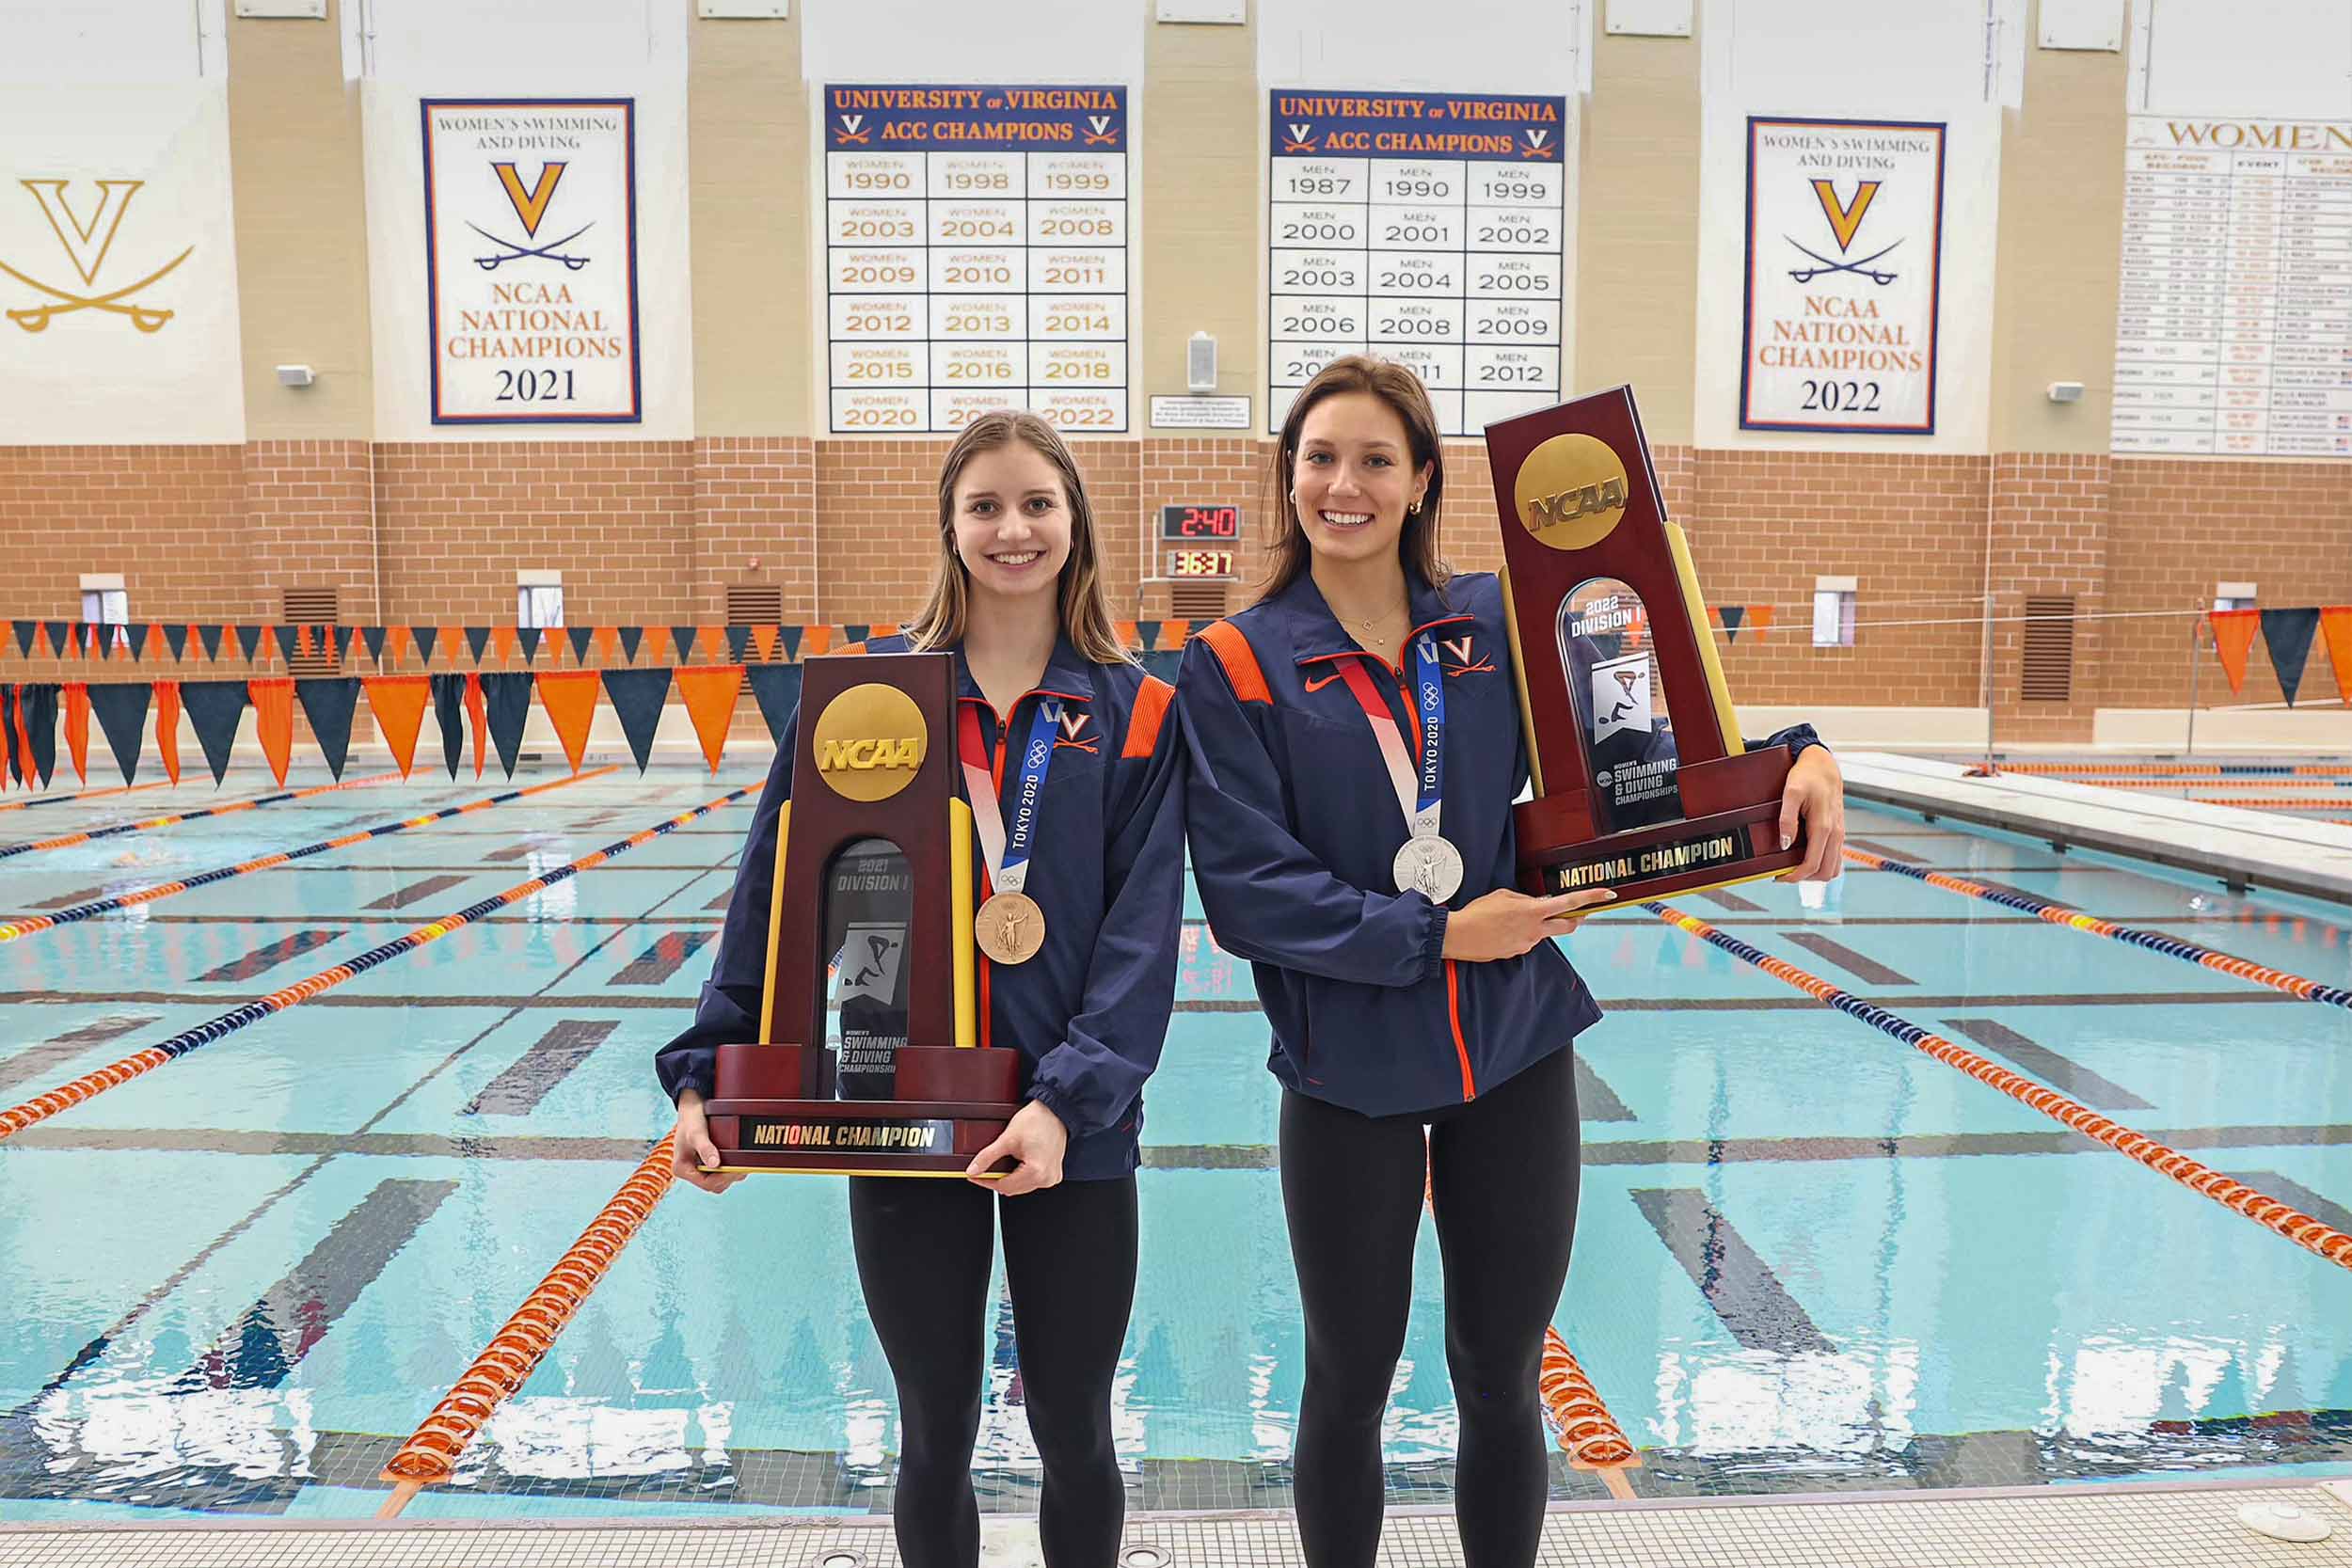 Candid portrait of Kate Douglass and Alex Walsh with olympic medal and holding national championship trophy of women's swimming and diving